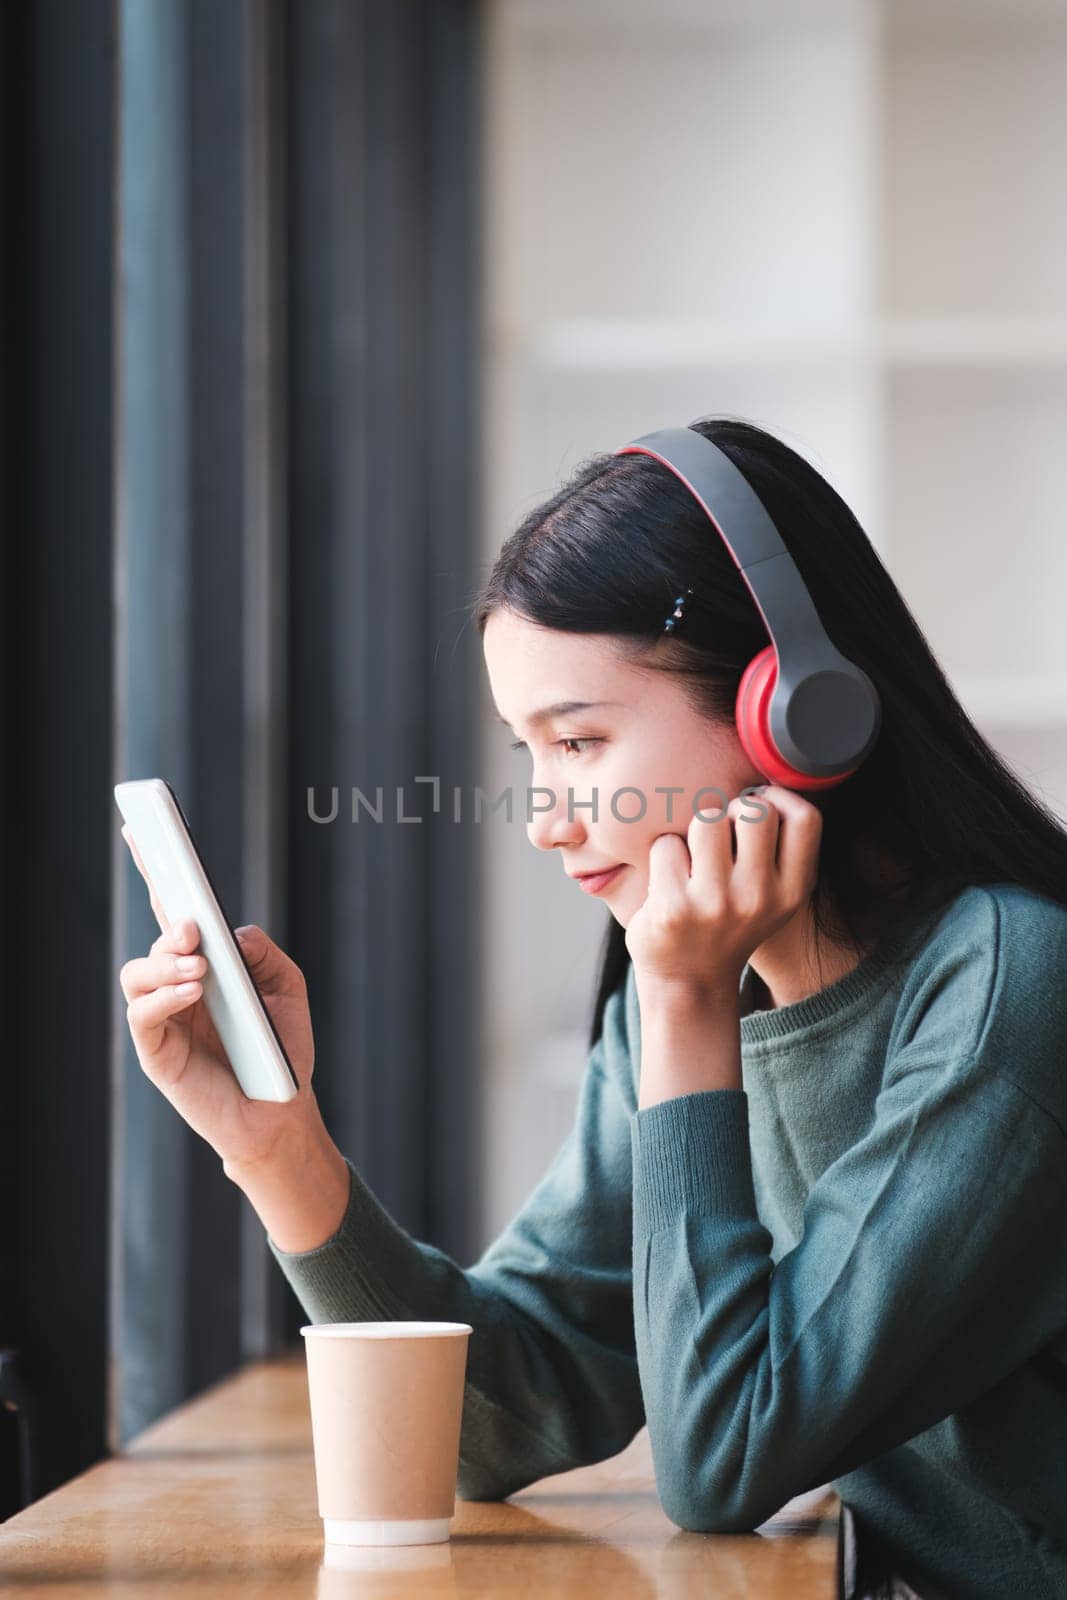 A woman is sitting at a table with a tablet and a cup of coffee. She is wearing headphones and looking at the tablet